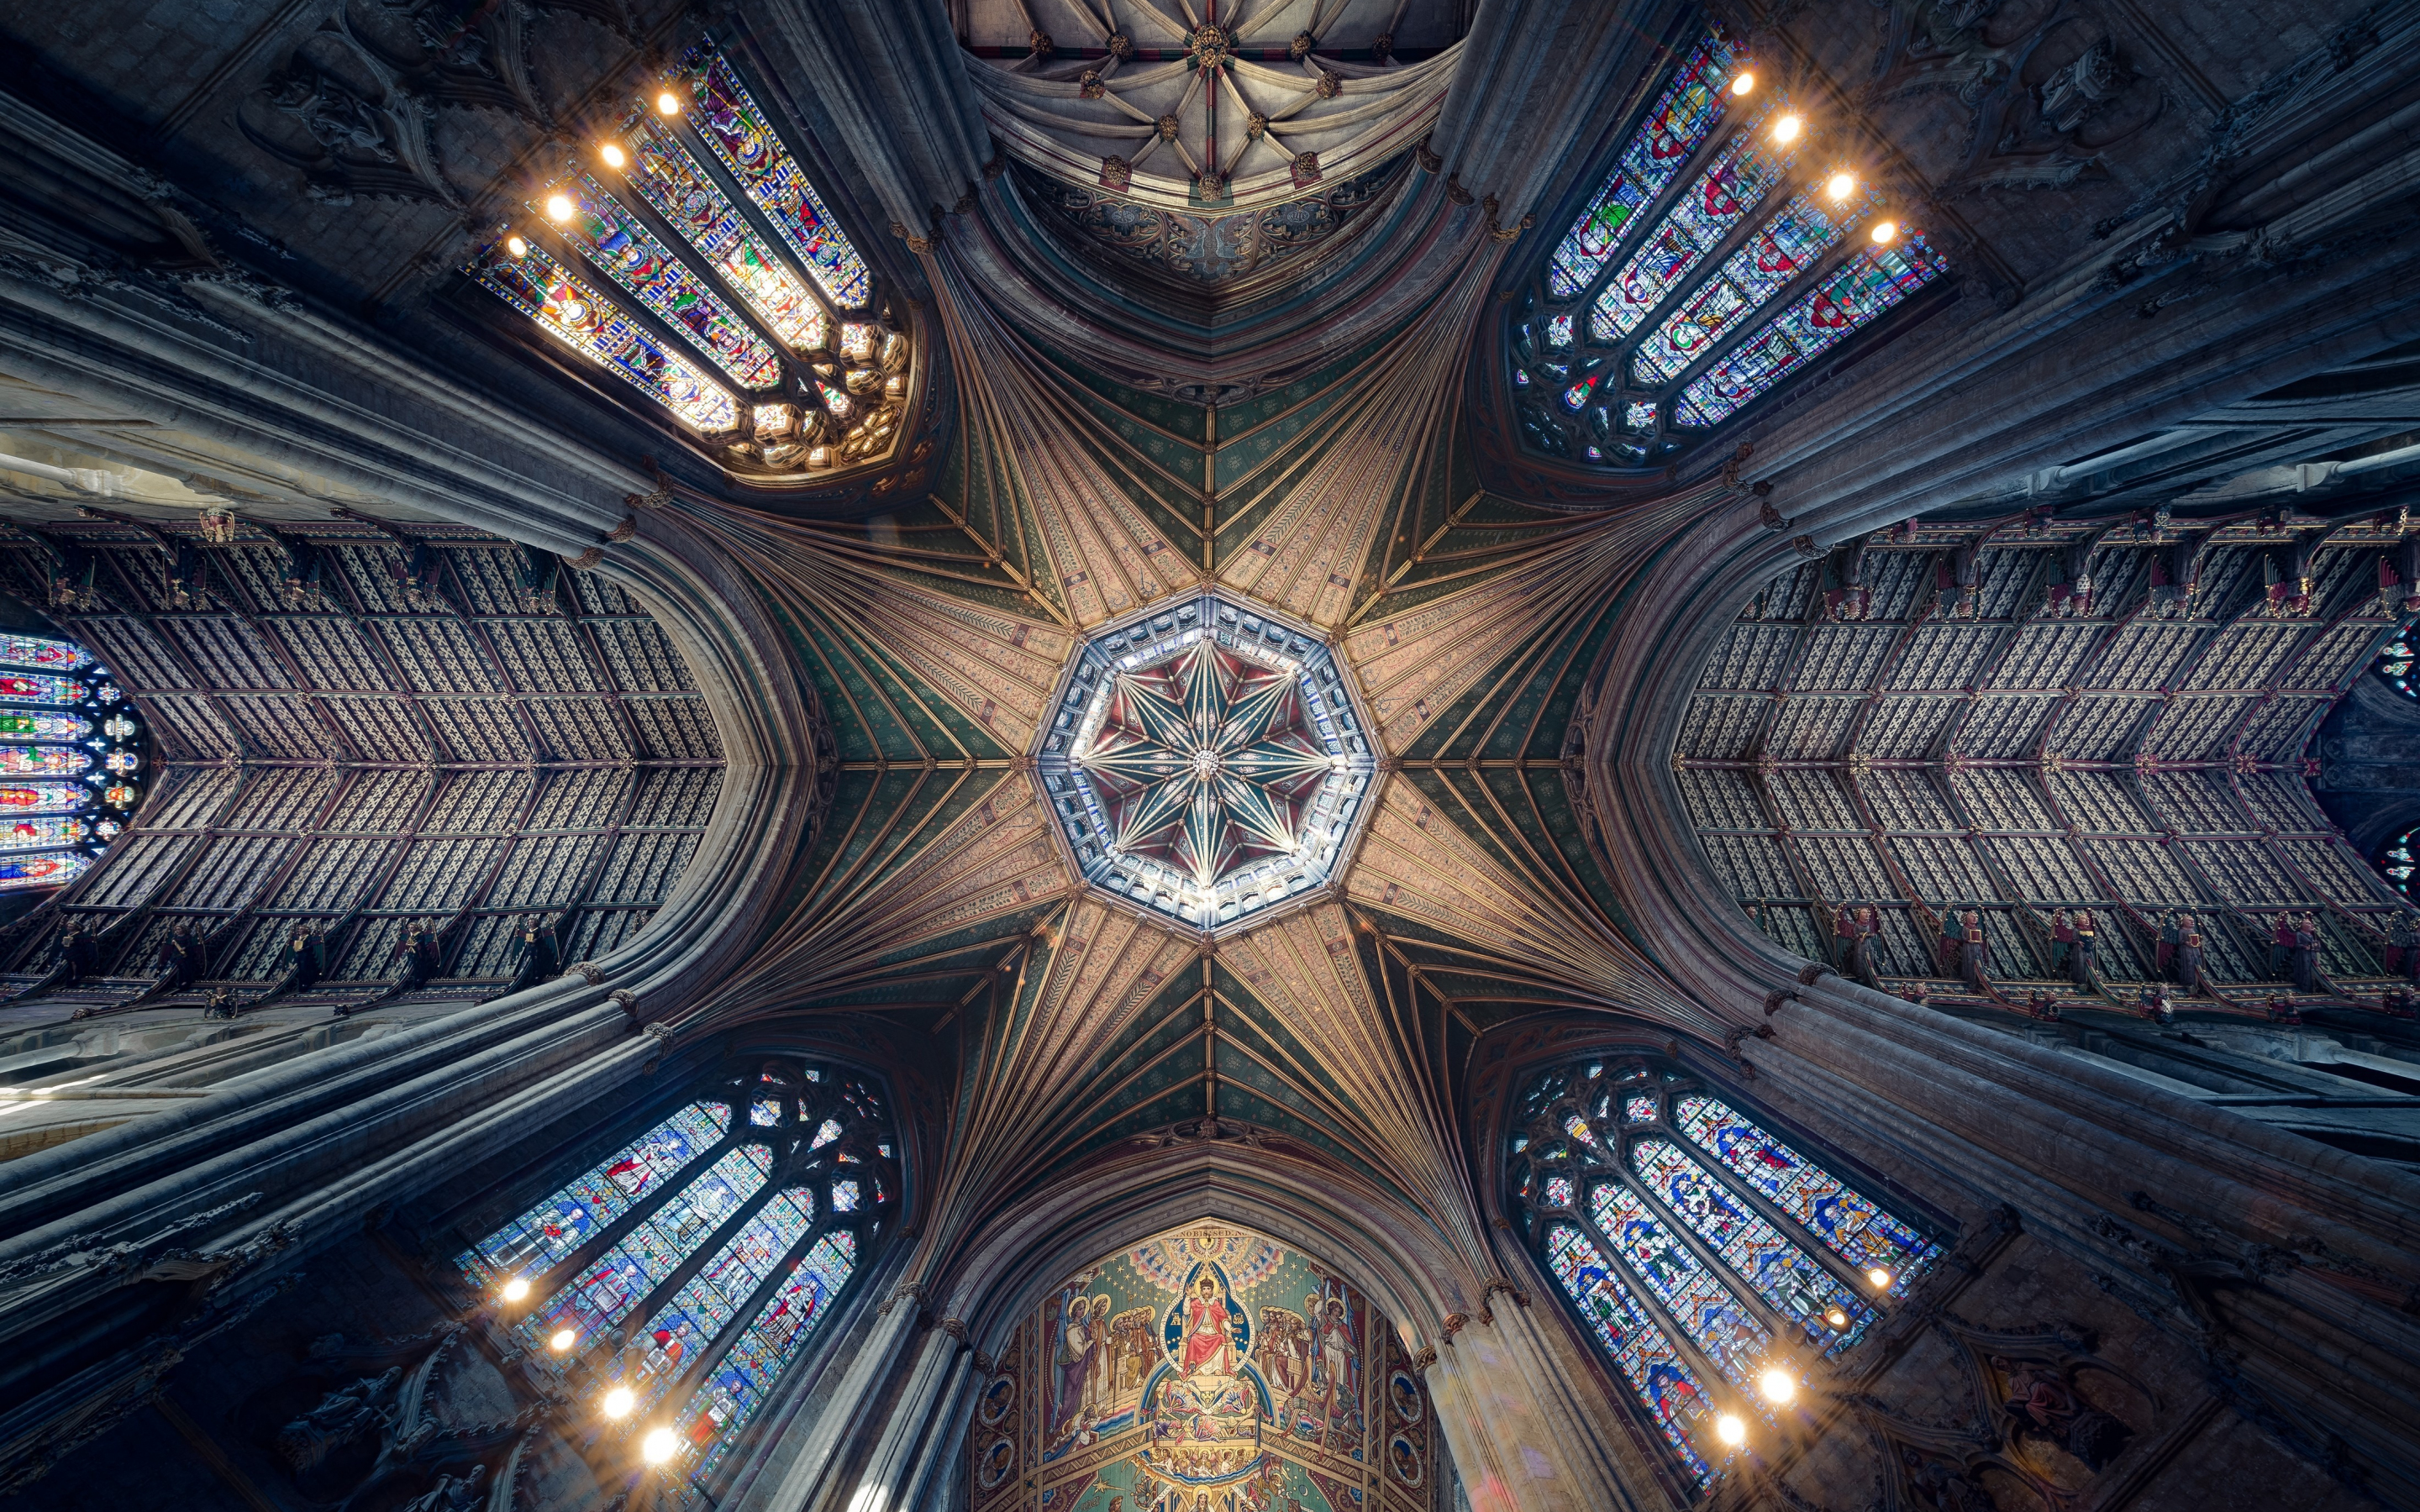 Ceiling, cathedral, symmetrical interior, architecture, 2880x1800 wallpaper